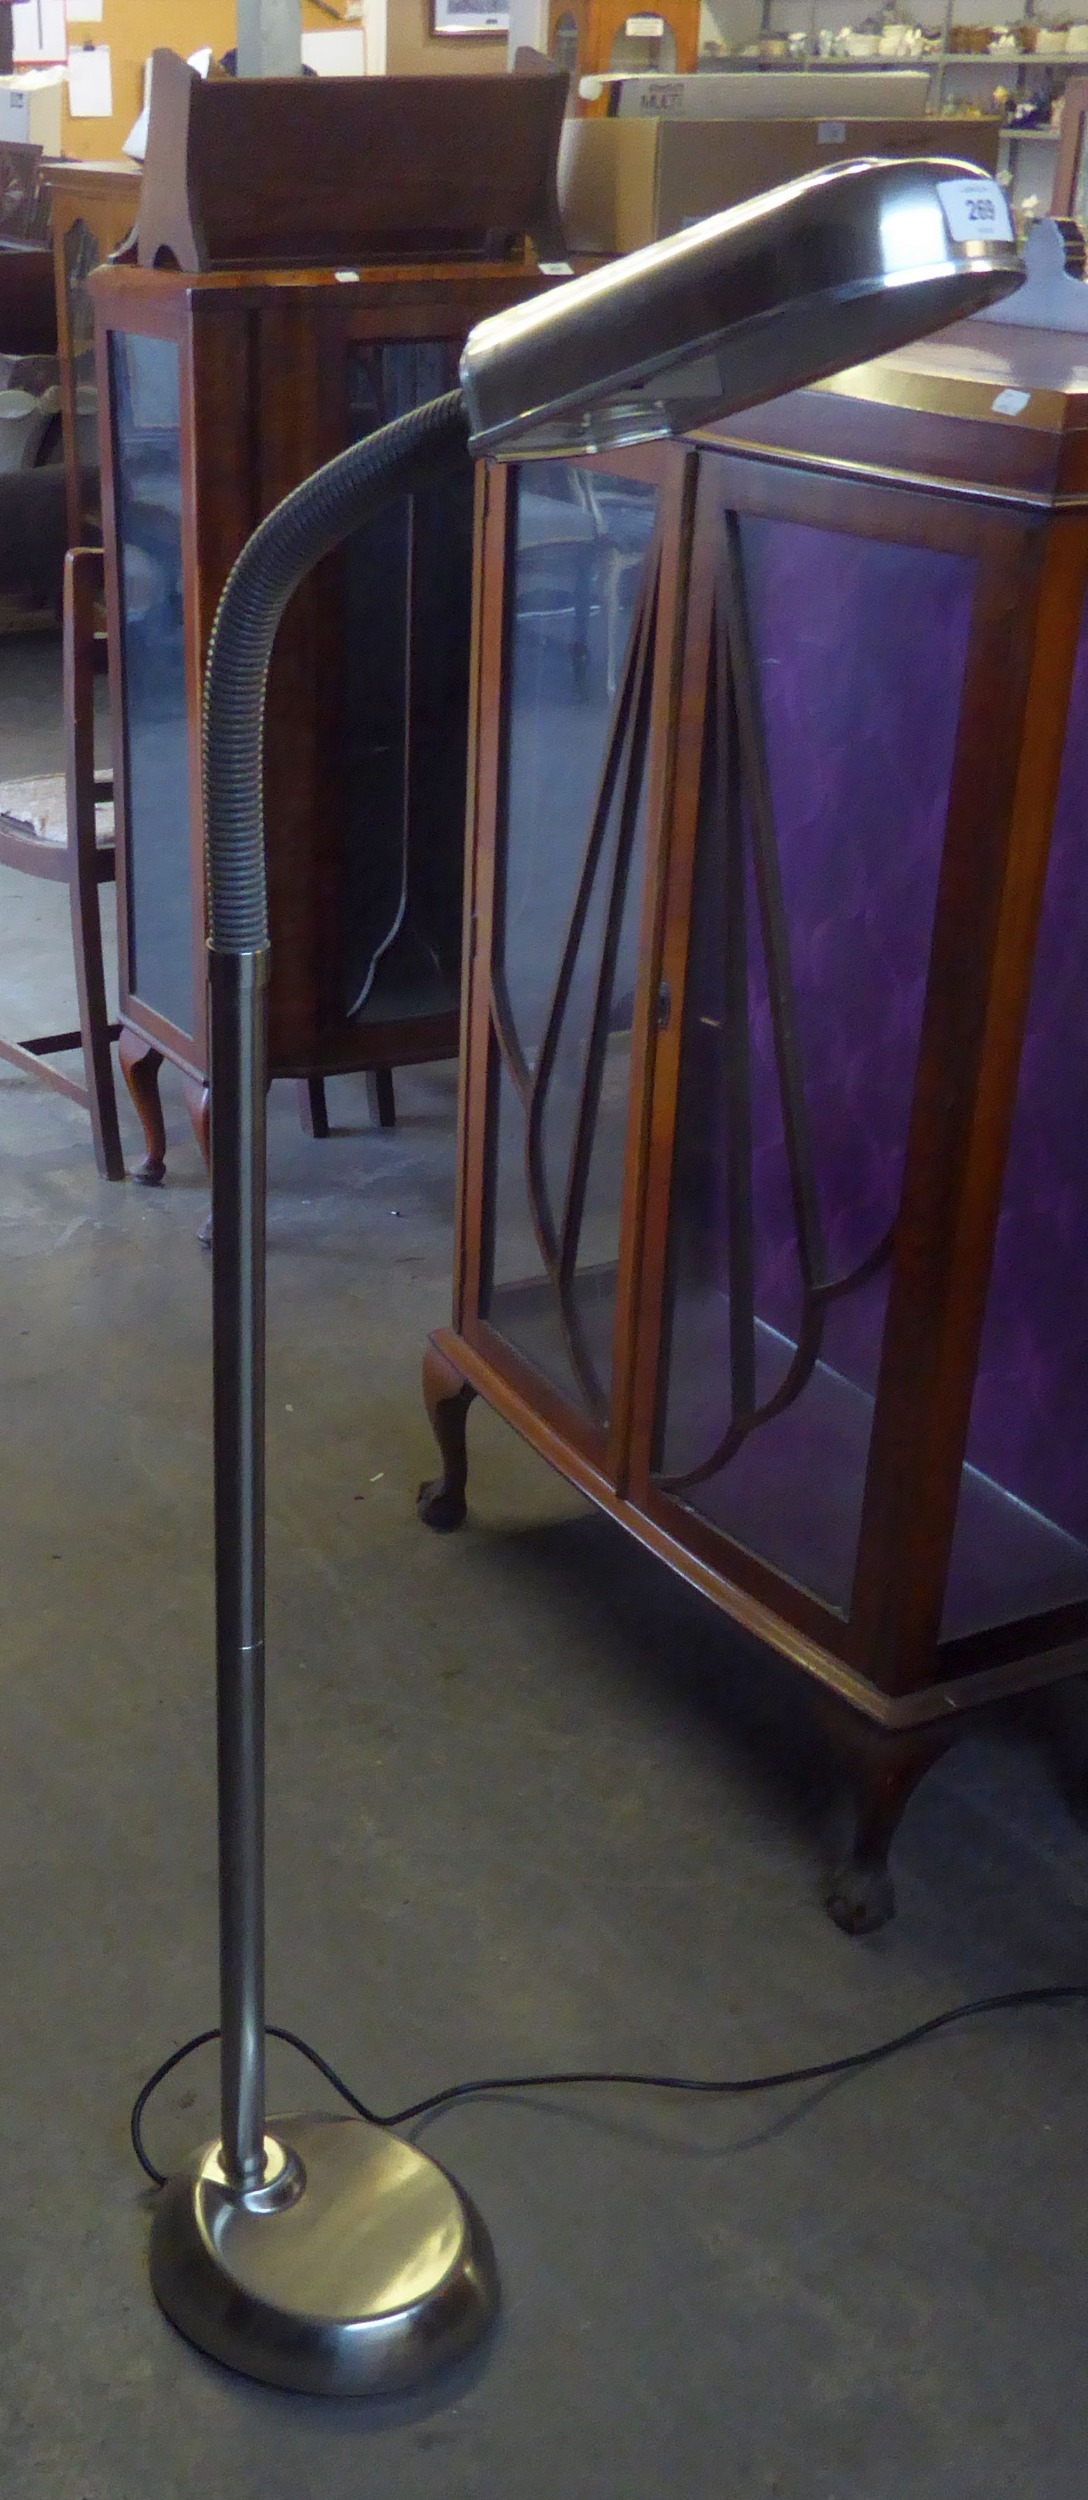 A MODERN METAL FLOOR STANDING READING LAMP WITH ADJUSTABLE TOP, HEAVY CIRCULAR BASE